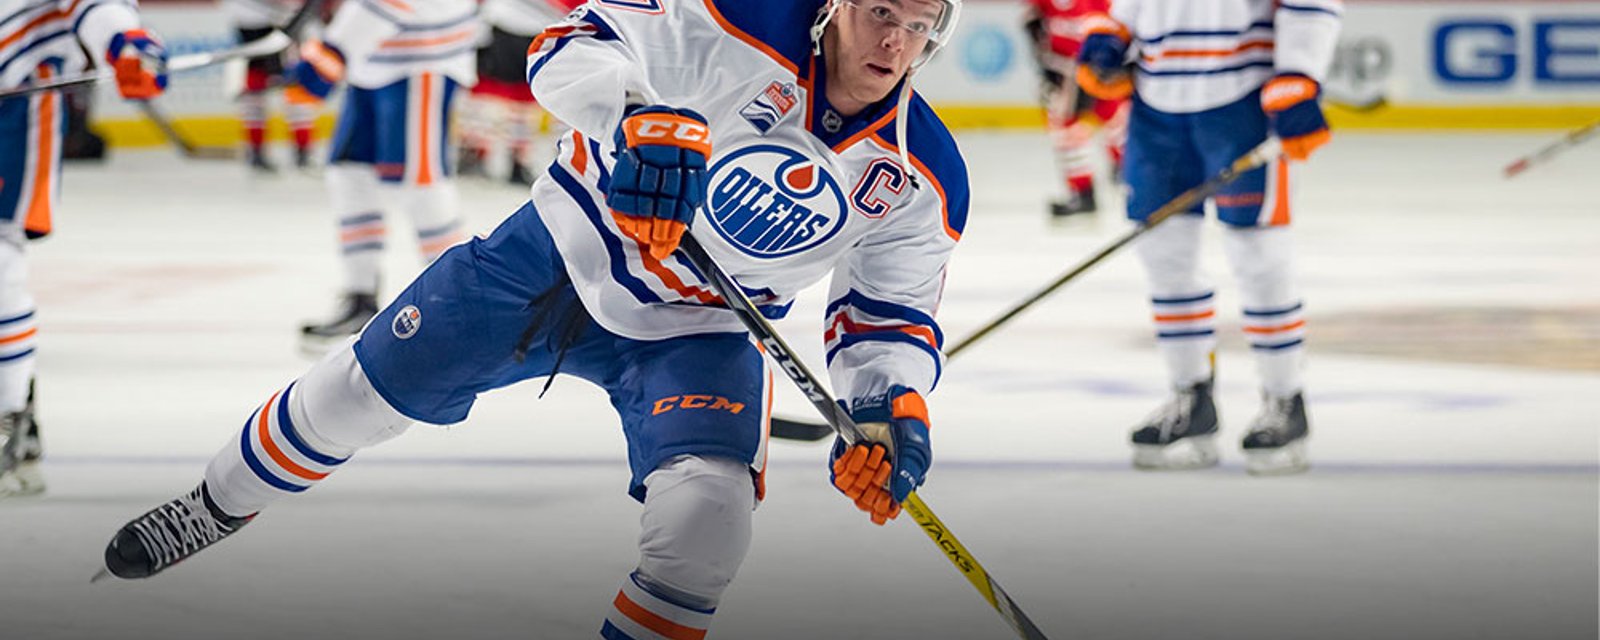 NHLPA boss Donald Fehr weighs in on the McDavid contract